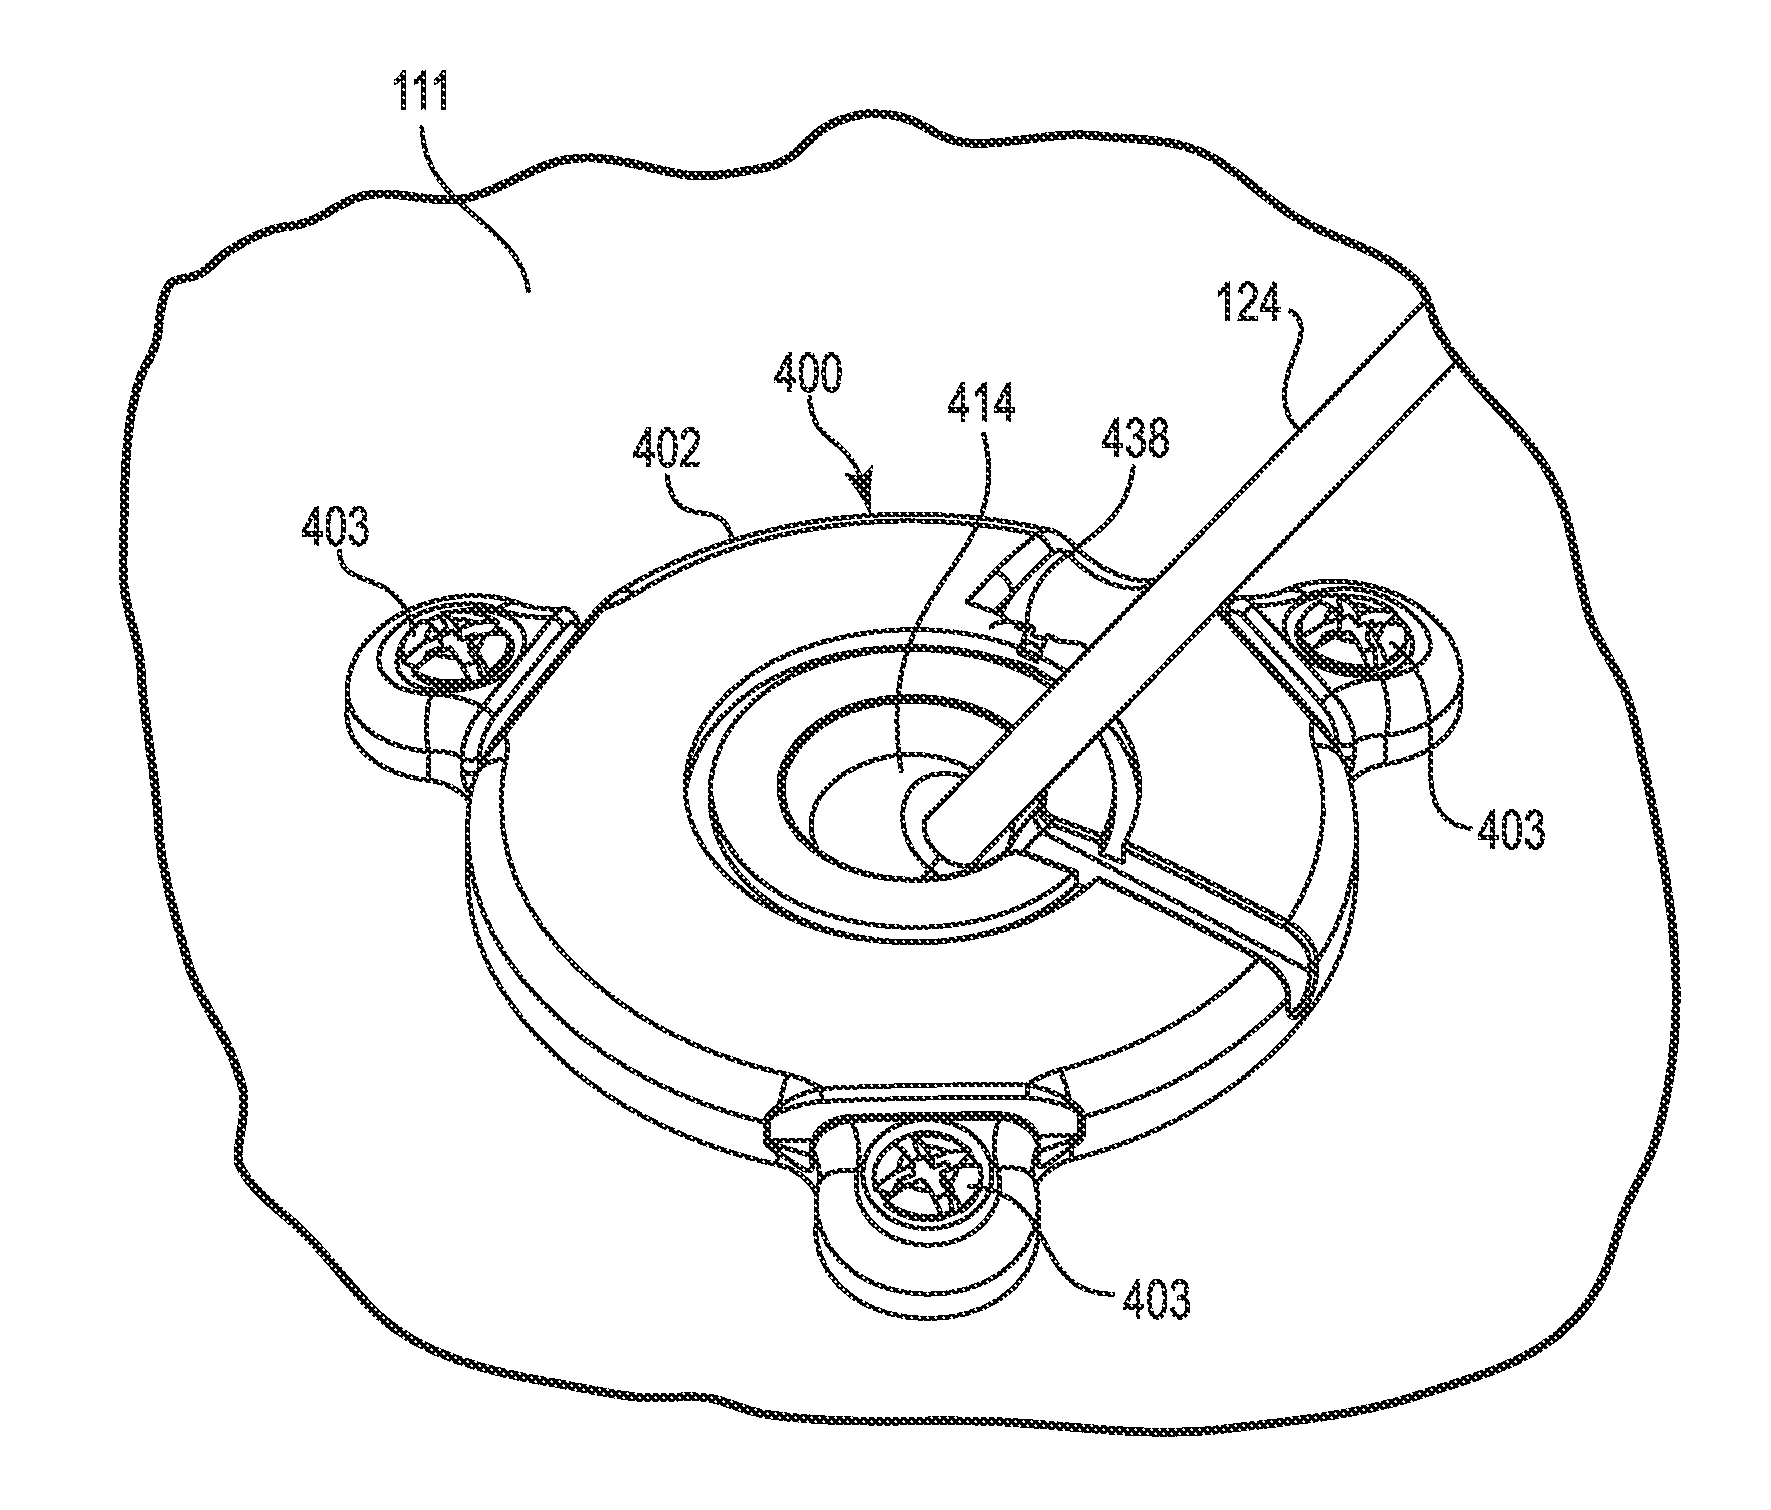 Socketed Portal Anchors and Methods of Using Same